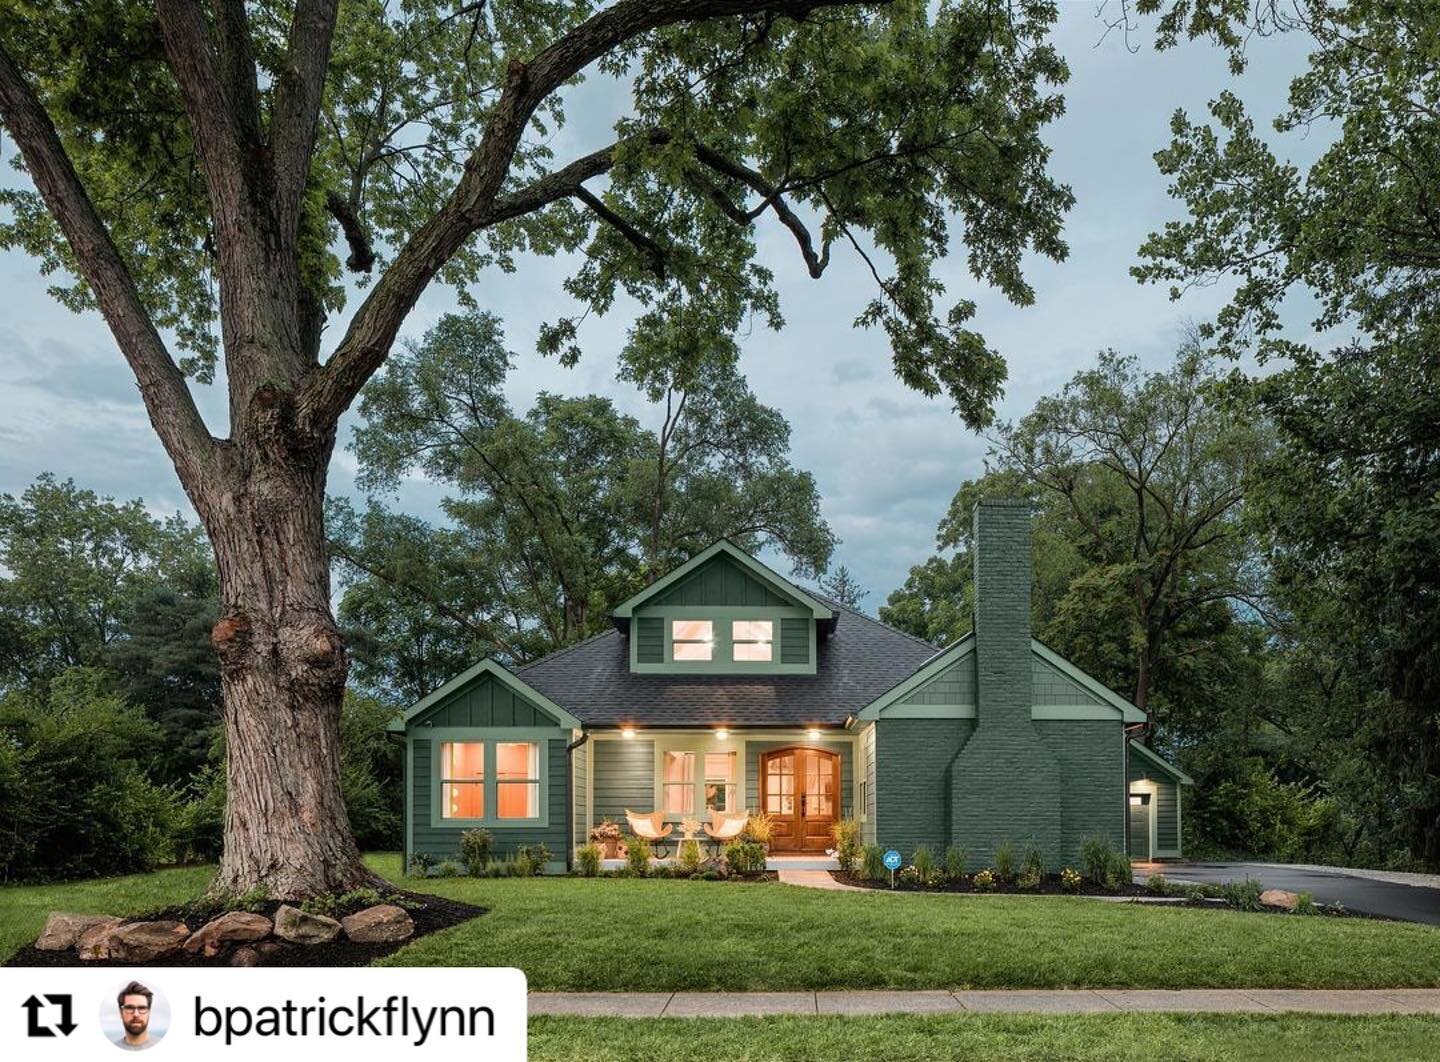 #Repost @bpatrickflynn 
・・・
The Indy house at dusk, amirite? Swipe for the before. Enter for a chance to win HGTV Urban Oasis 2021 through Nov. 22nd on hgtv.com. Special shoutouts to @mina_starsiak_hawk and @housesevendesign for being the most awesom